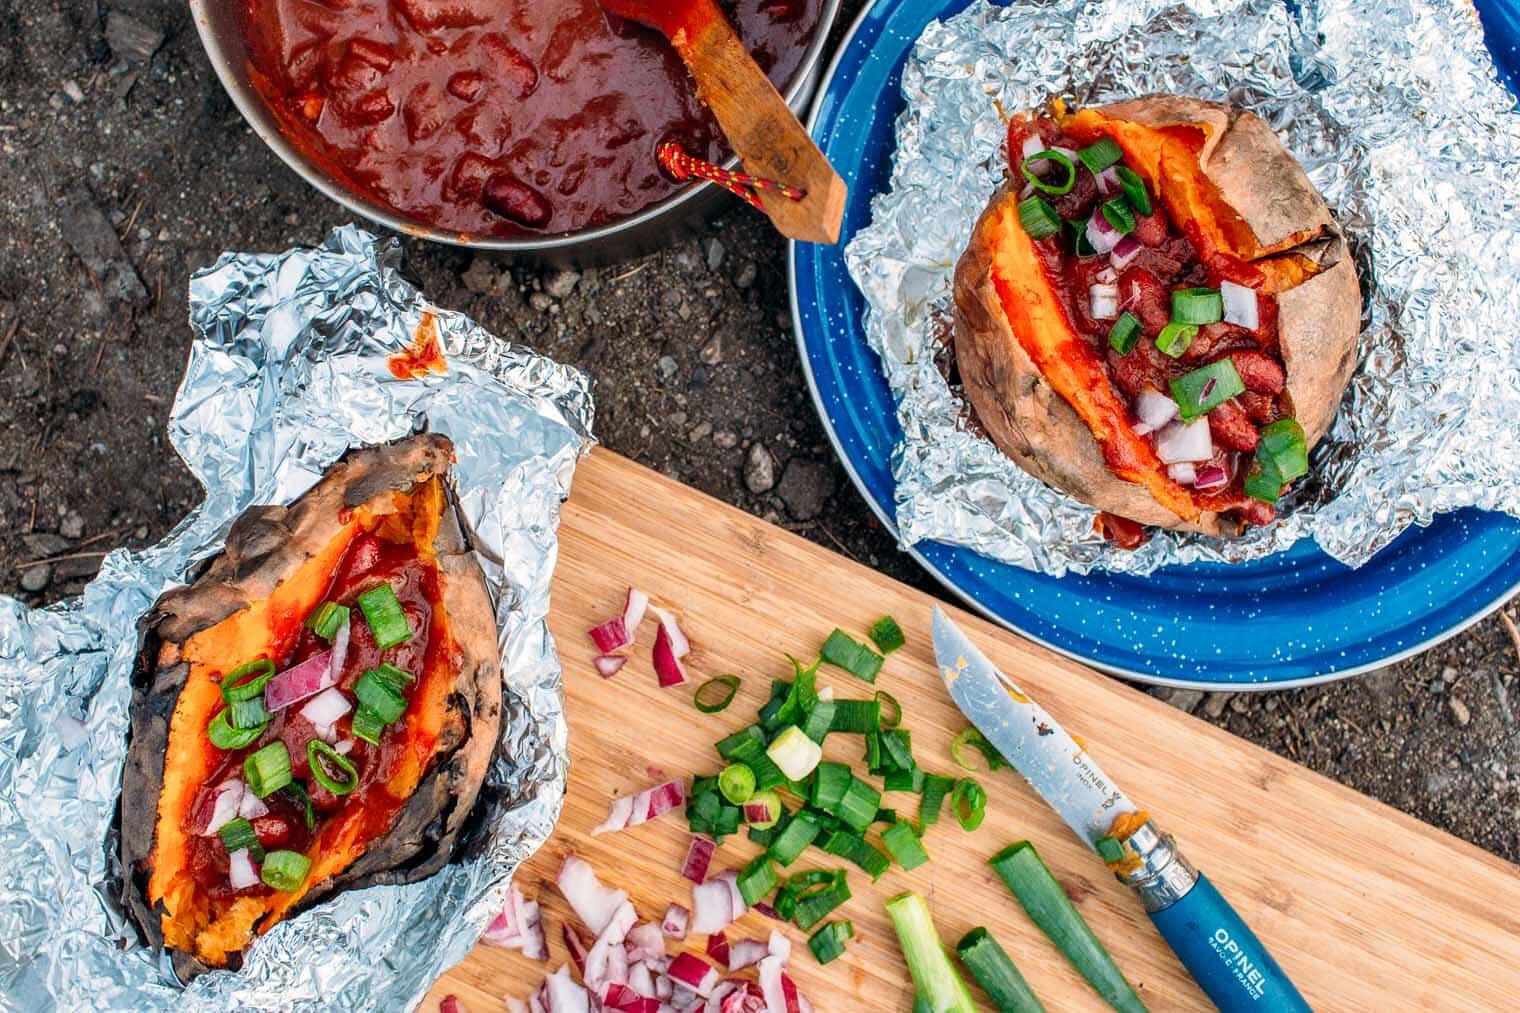 foil-wrapped-baked-sweet-potatoes-with-chili-camping-meal-9.jpg